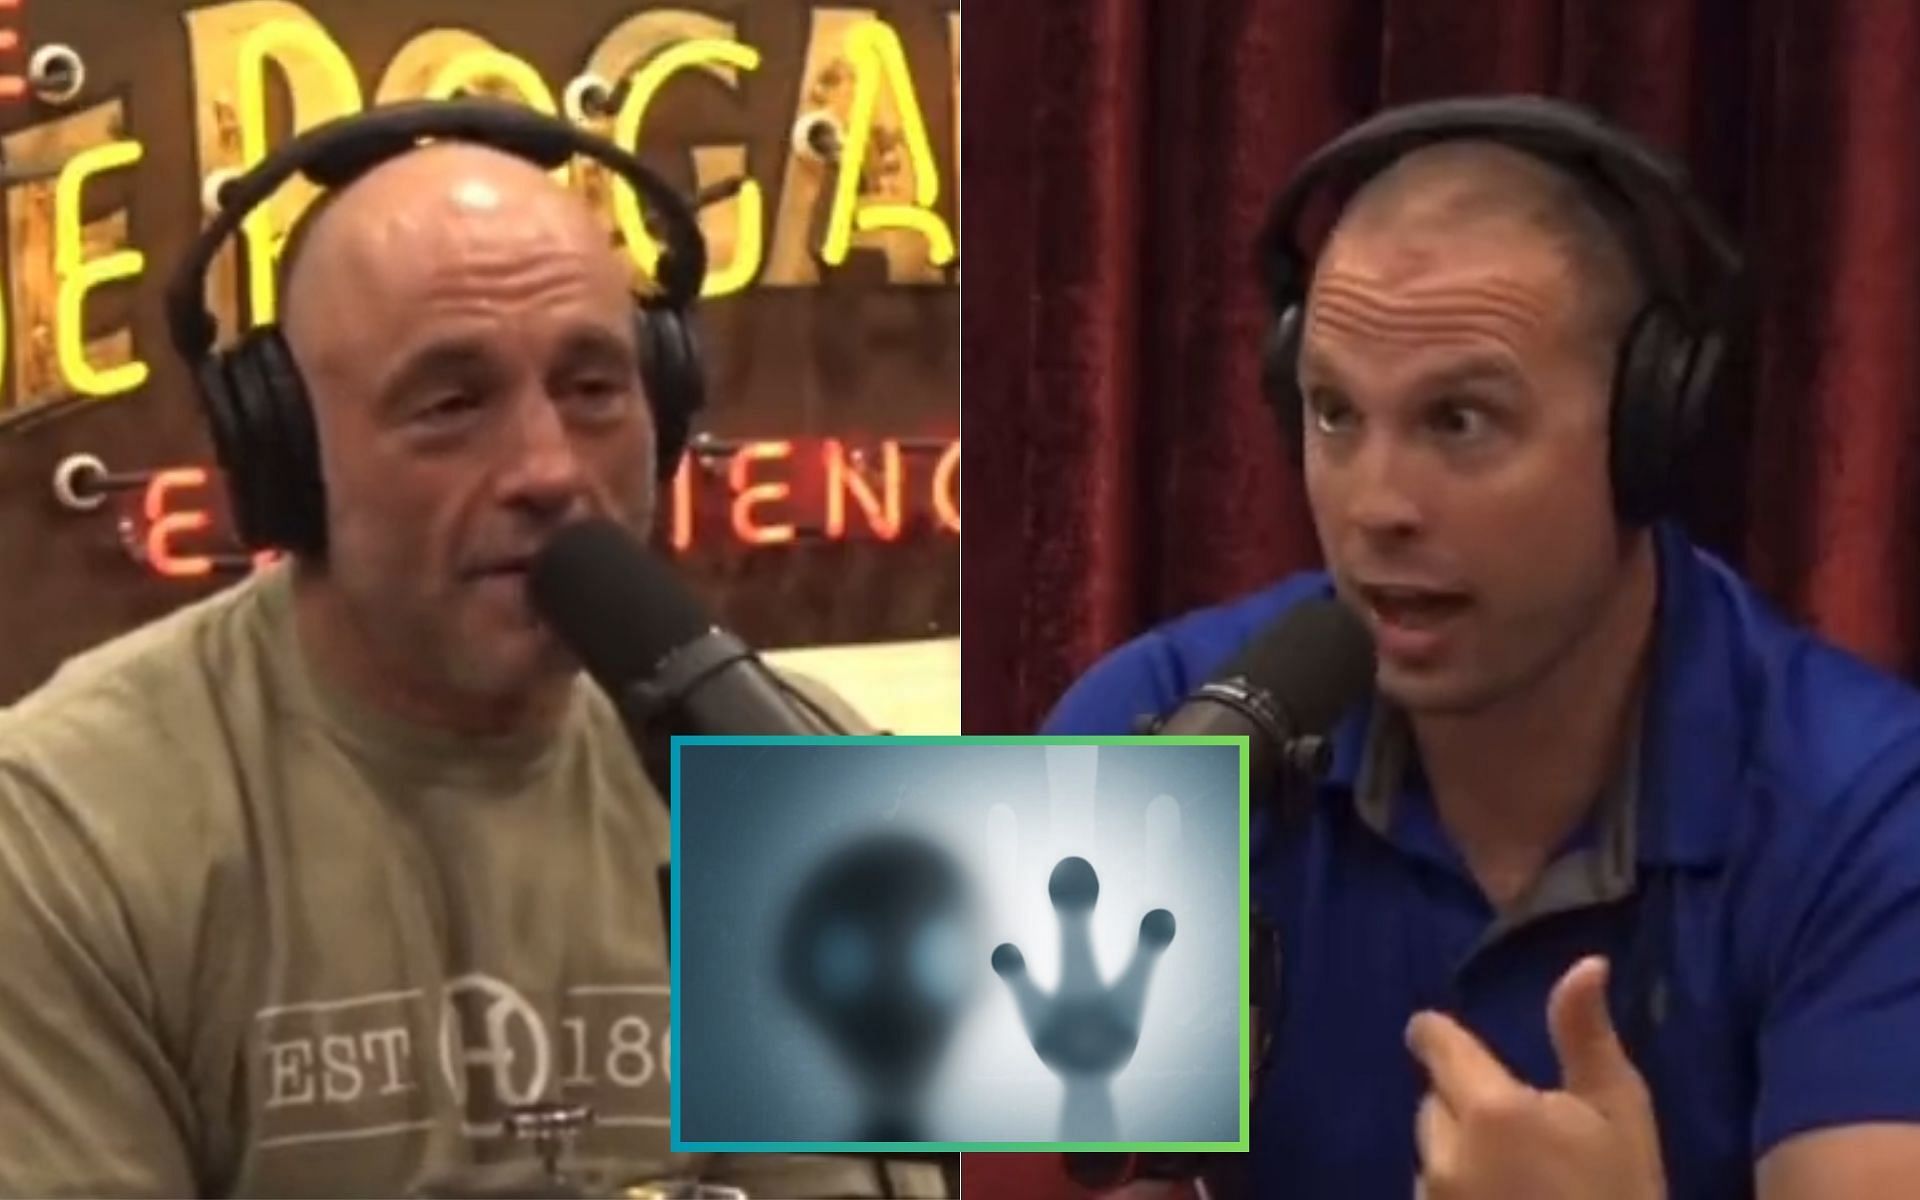 Joe Rogan (Left); representational image of possible alien being (Middle); David Grusch (Right) [*Image courtesy: @UAPJames Twitter/X, JRE clips YouTube channel, and Creative Commons]